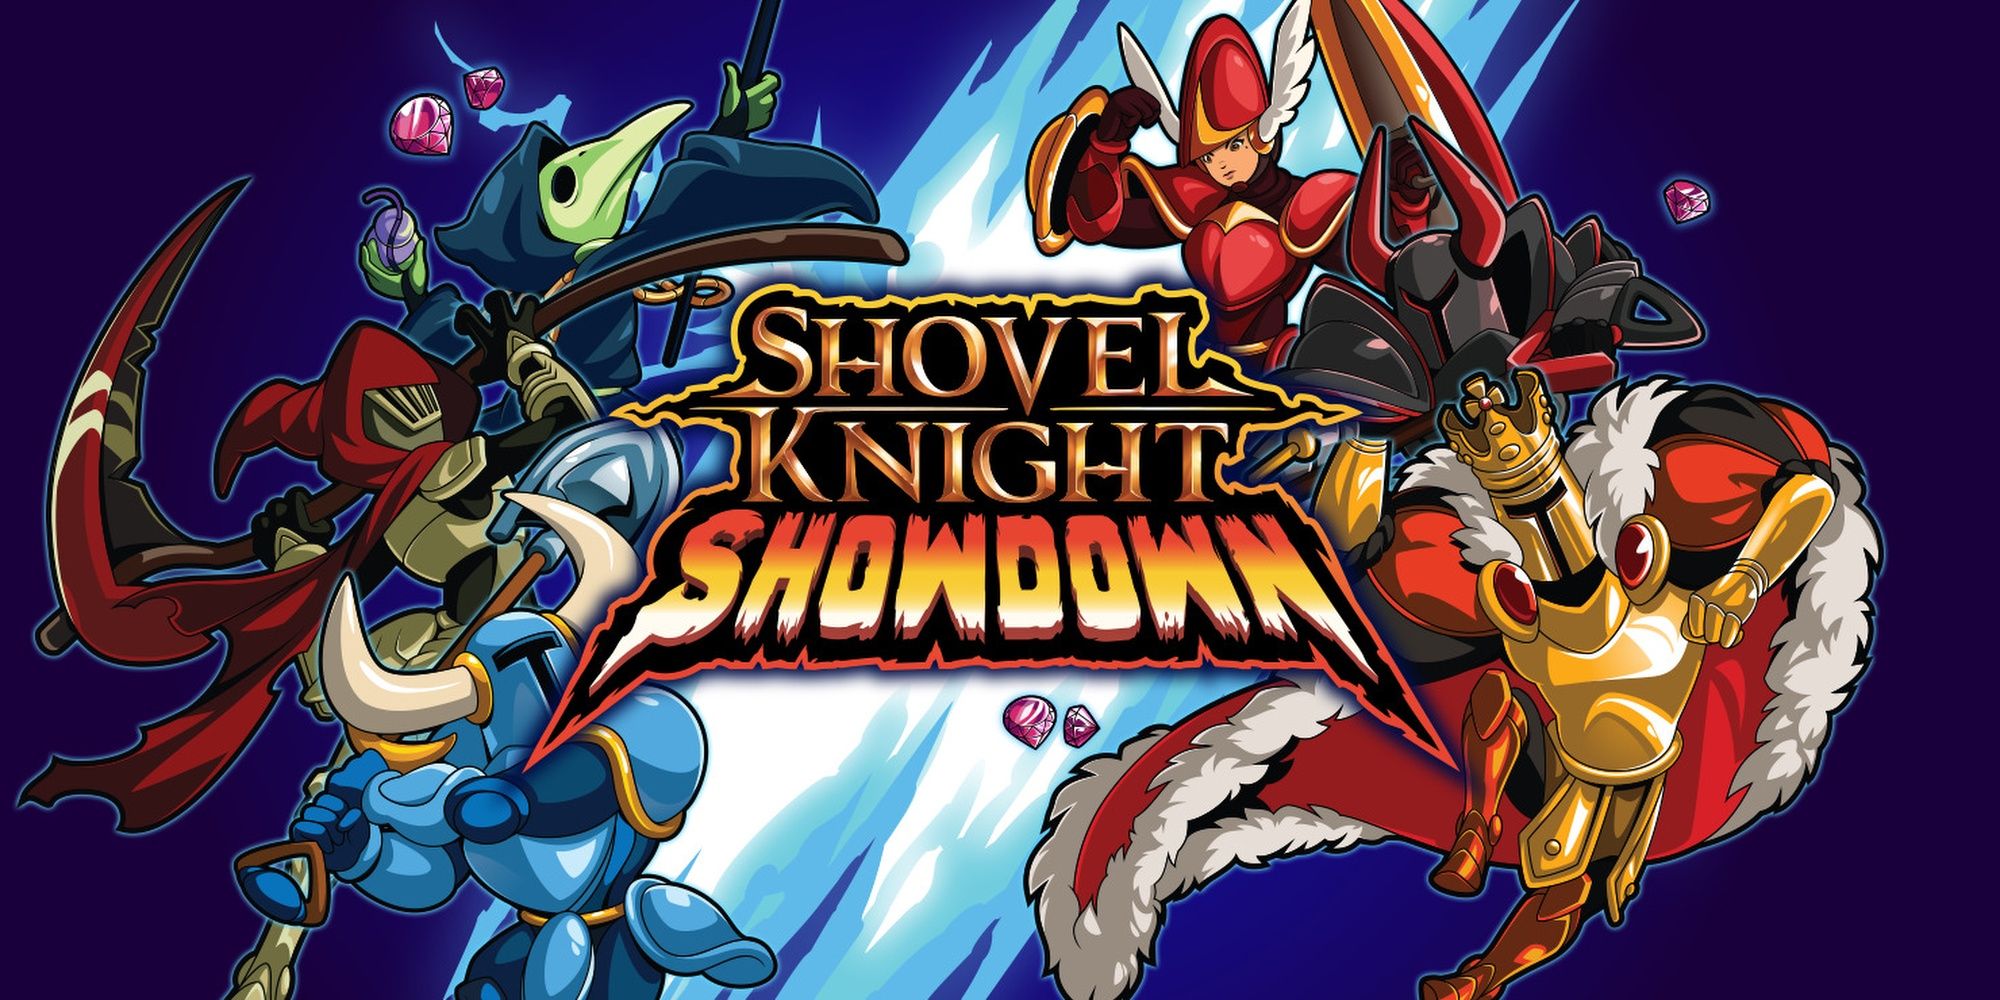 The title screen from Shovel Knight Showdown